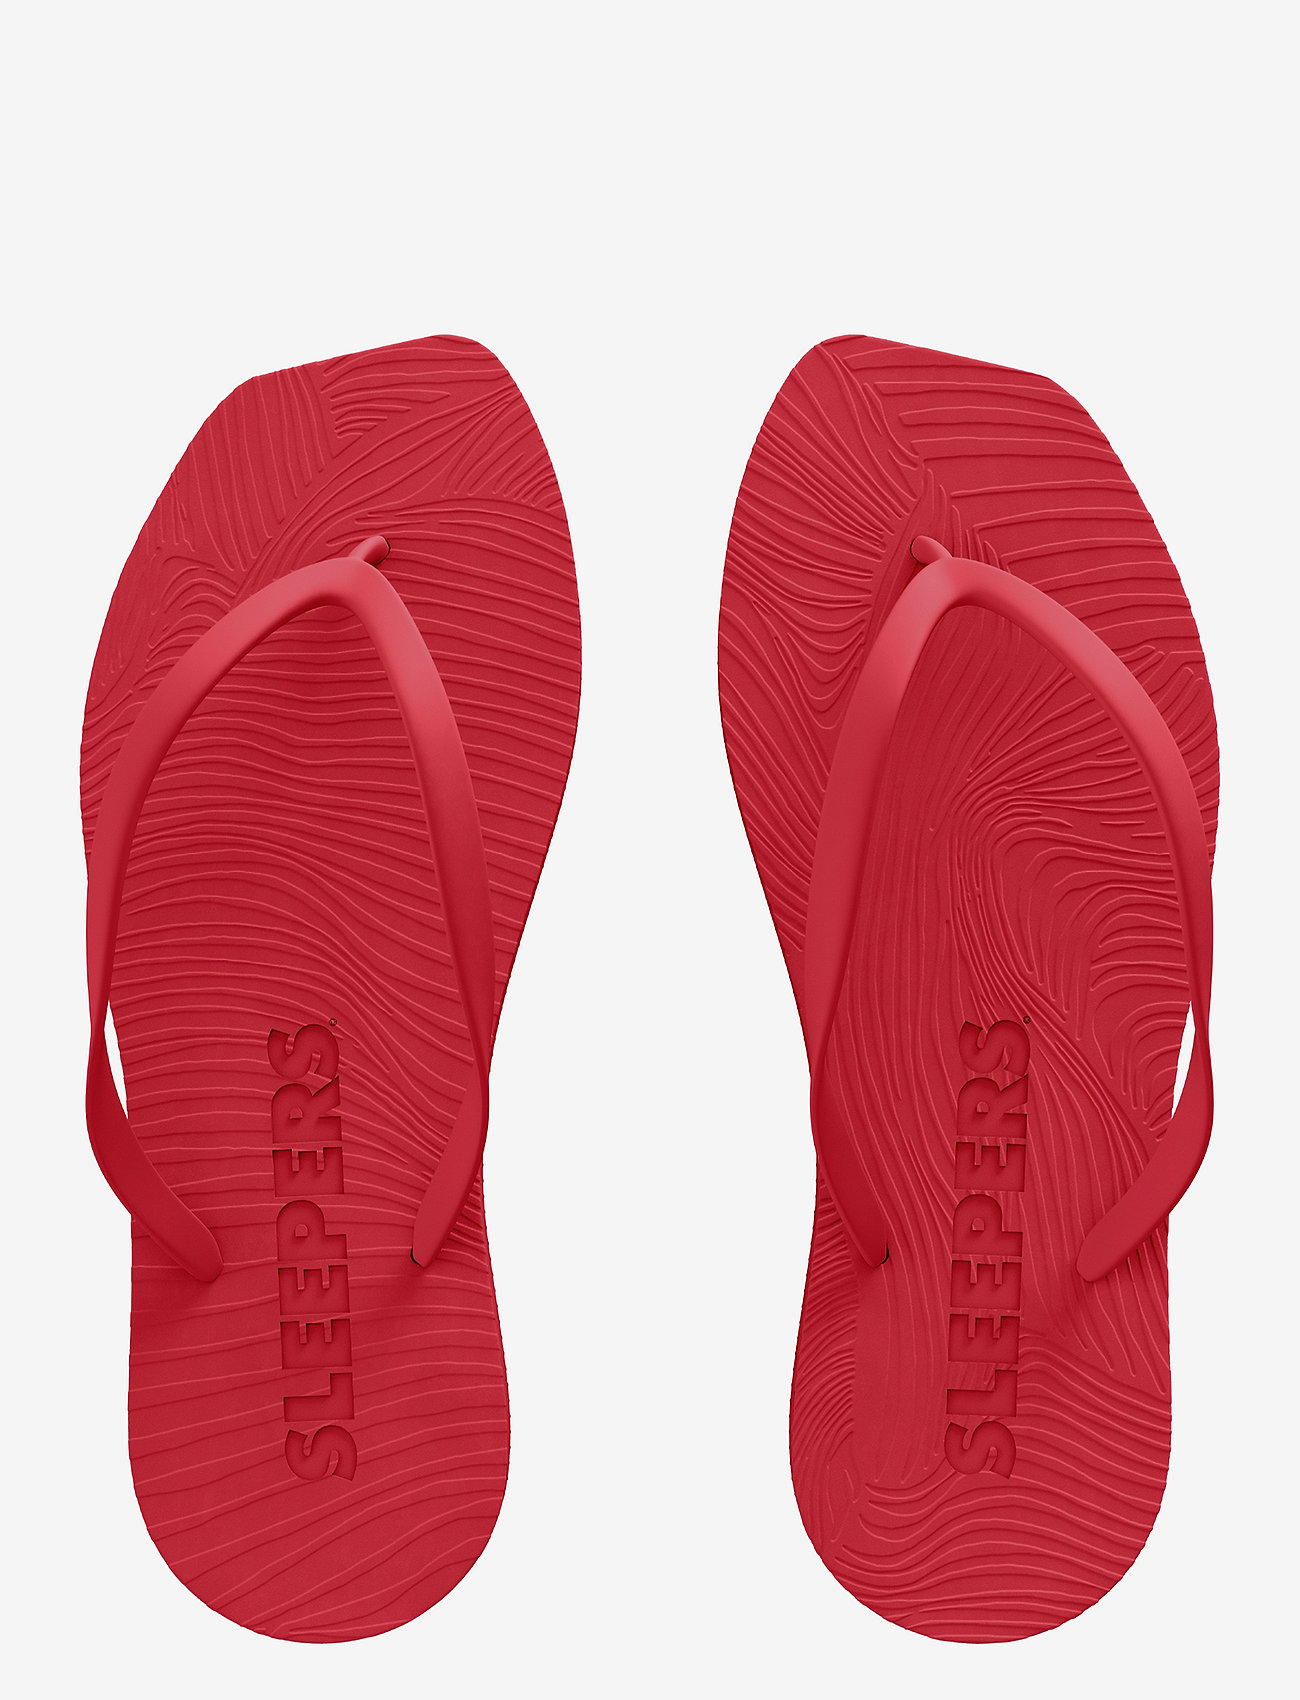 SLEEPERS - Tapered Flip Flop - women - red - 1